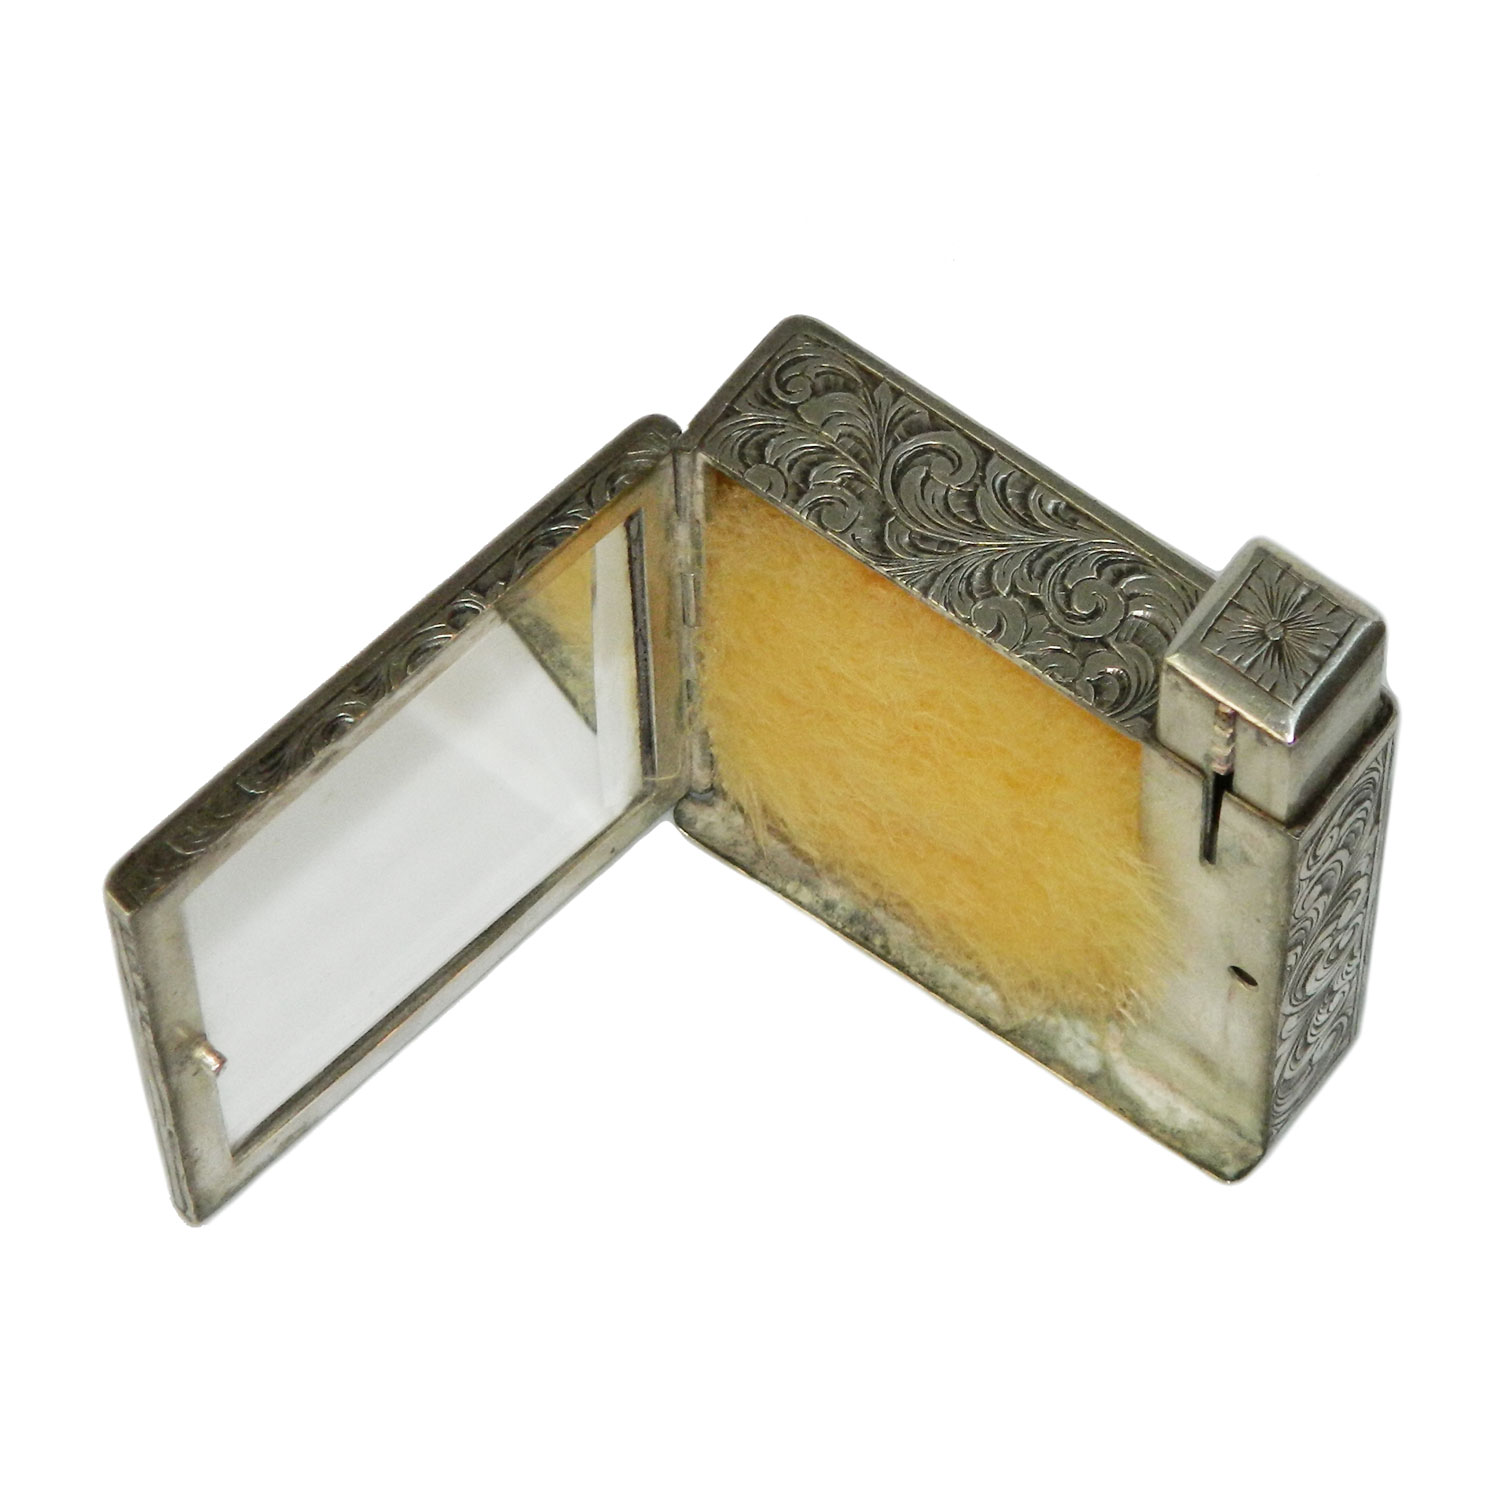 Italian sterling silver compact